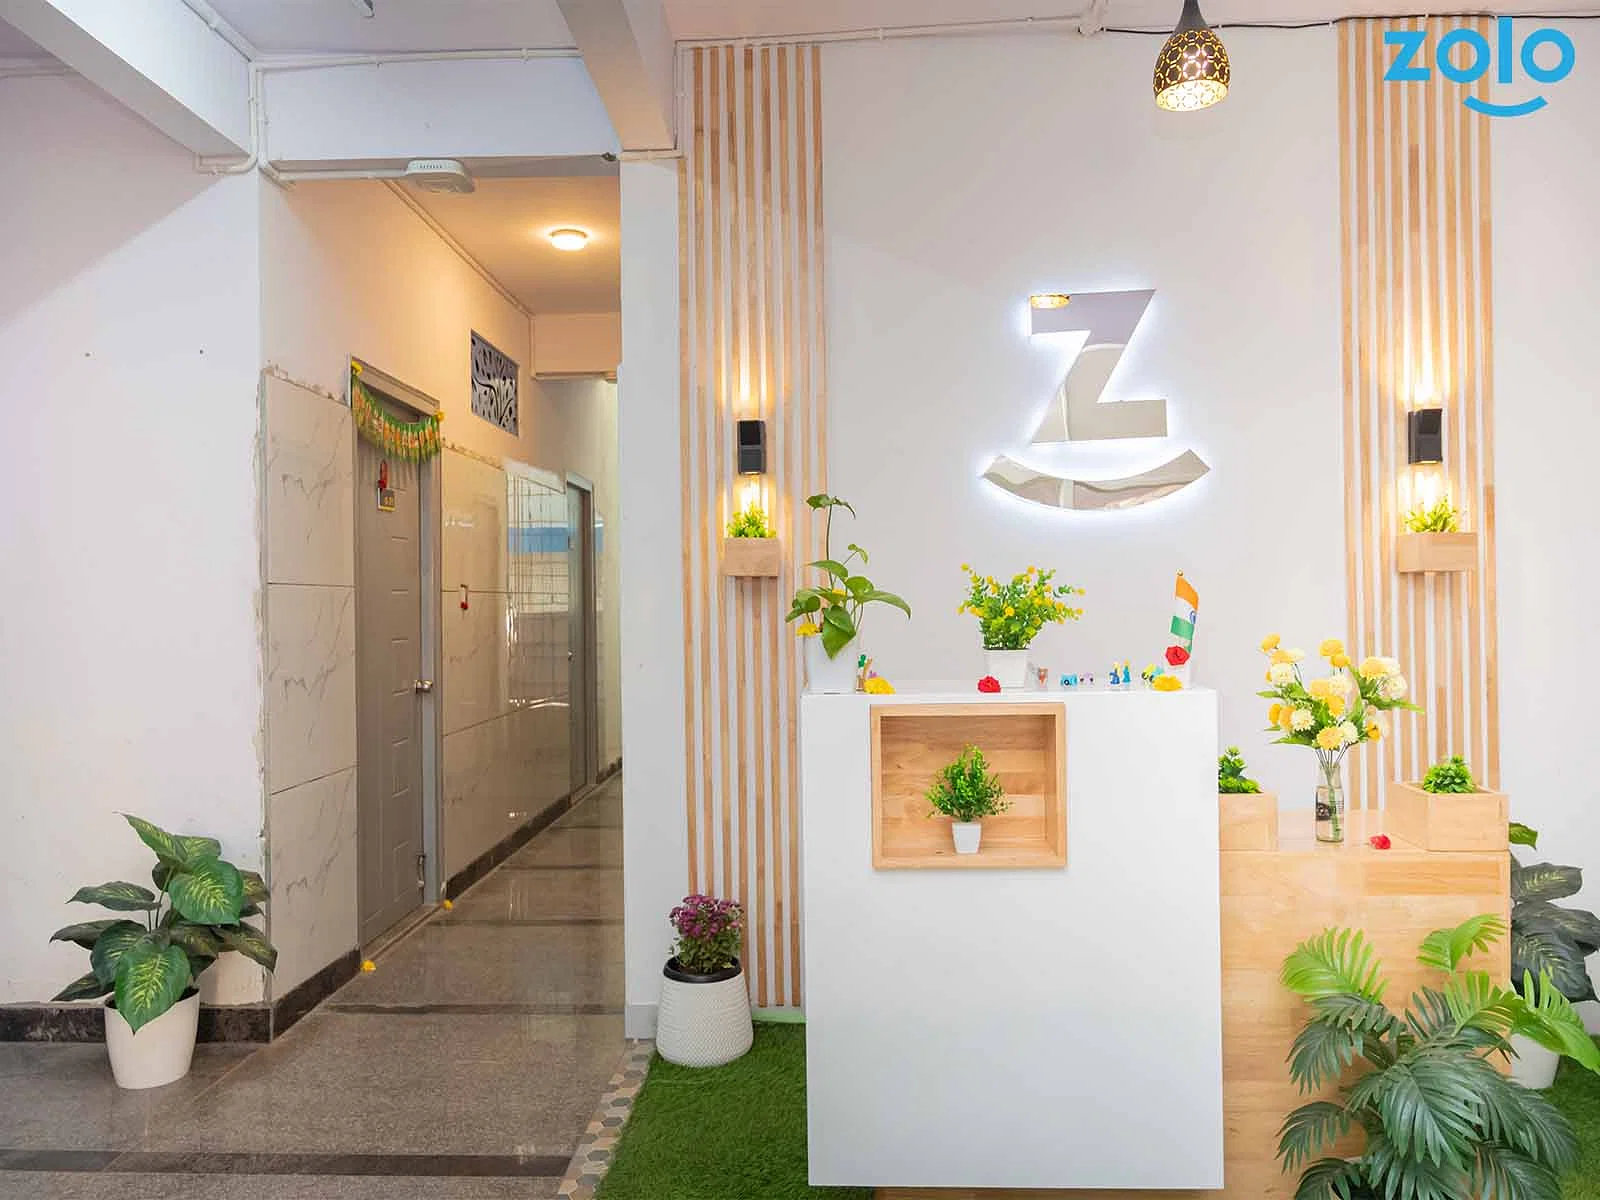 Comfortable and affordable Zolo PGs in Indiranagar for students and working professionals-sign up-Zolo Leela